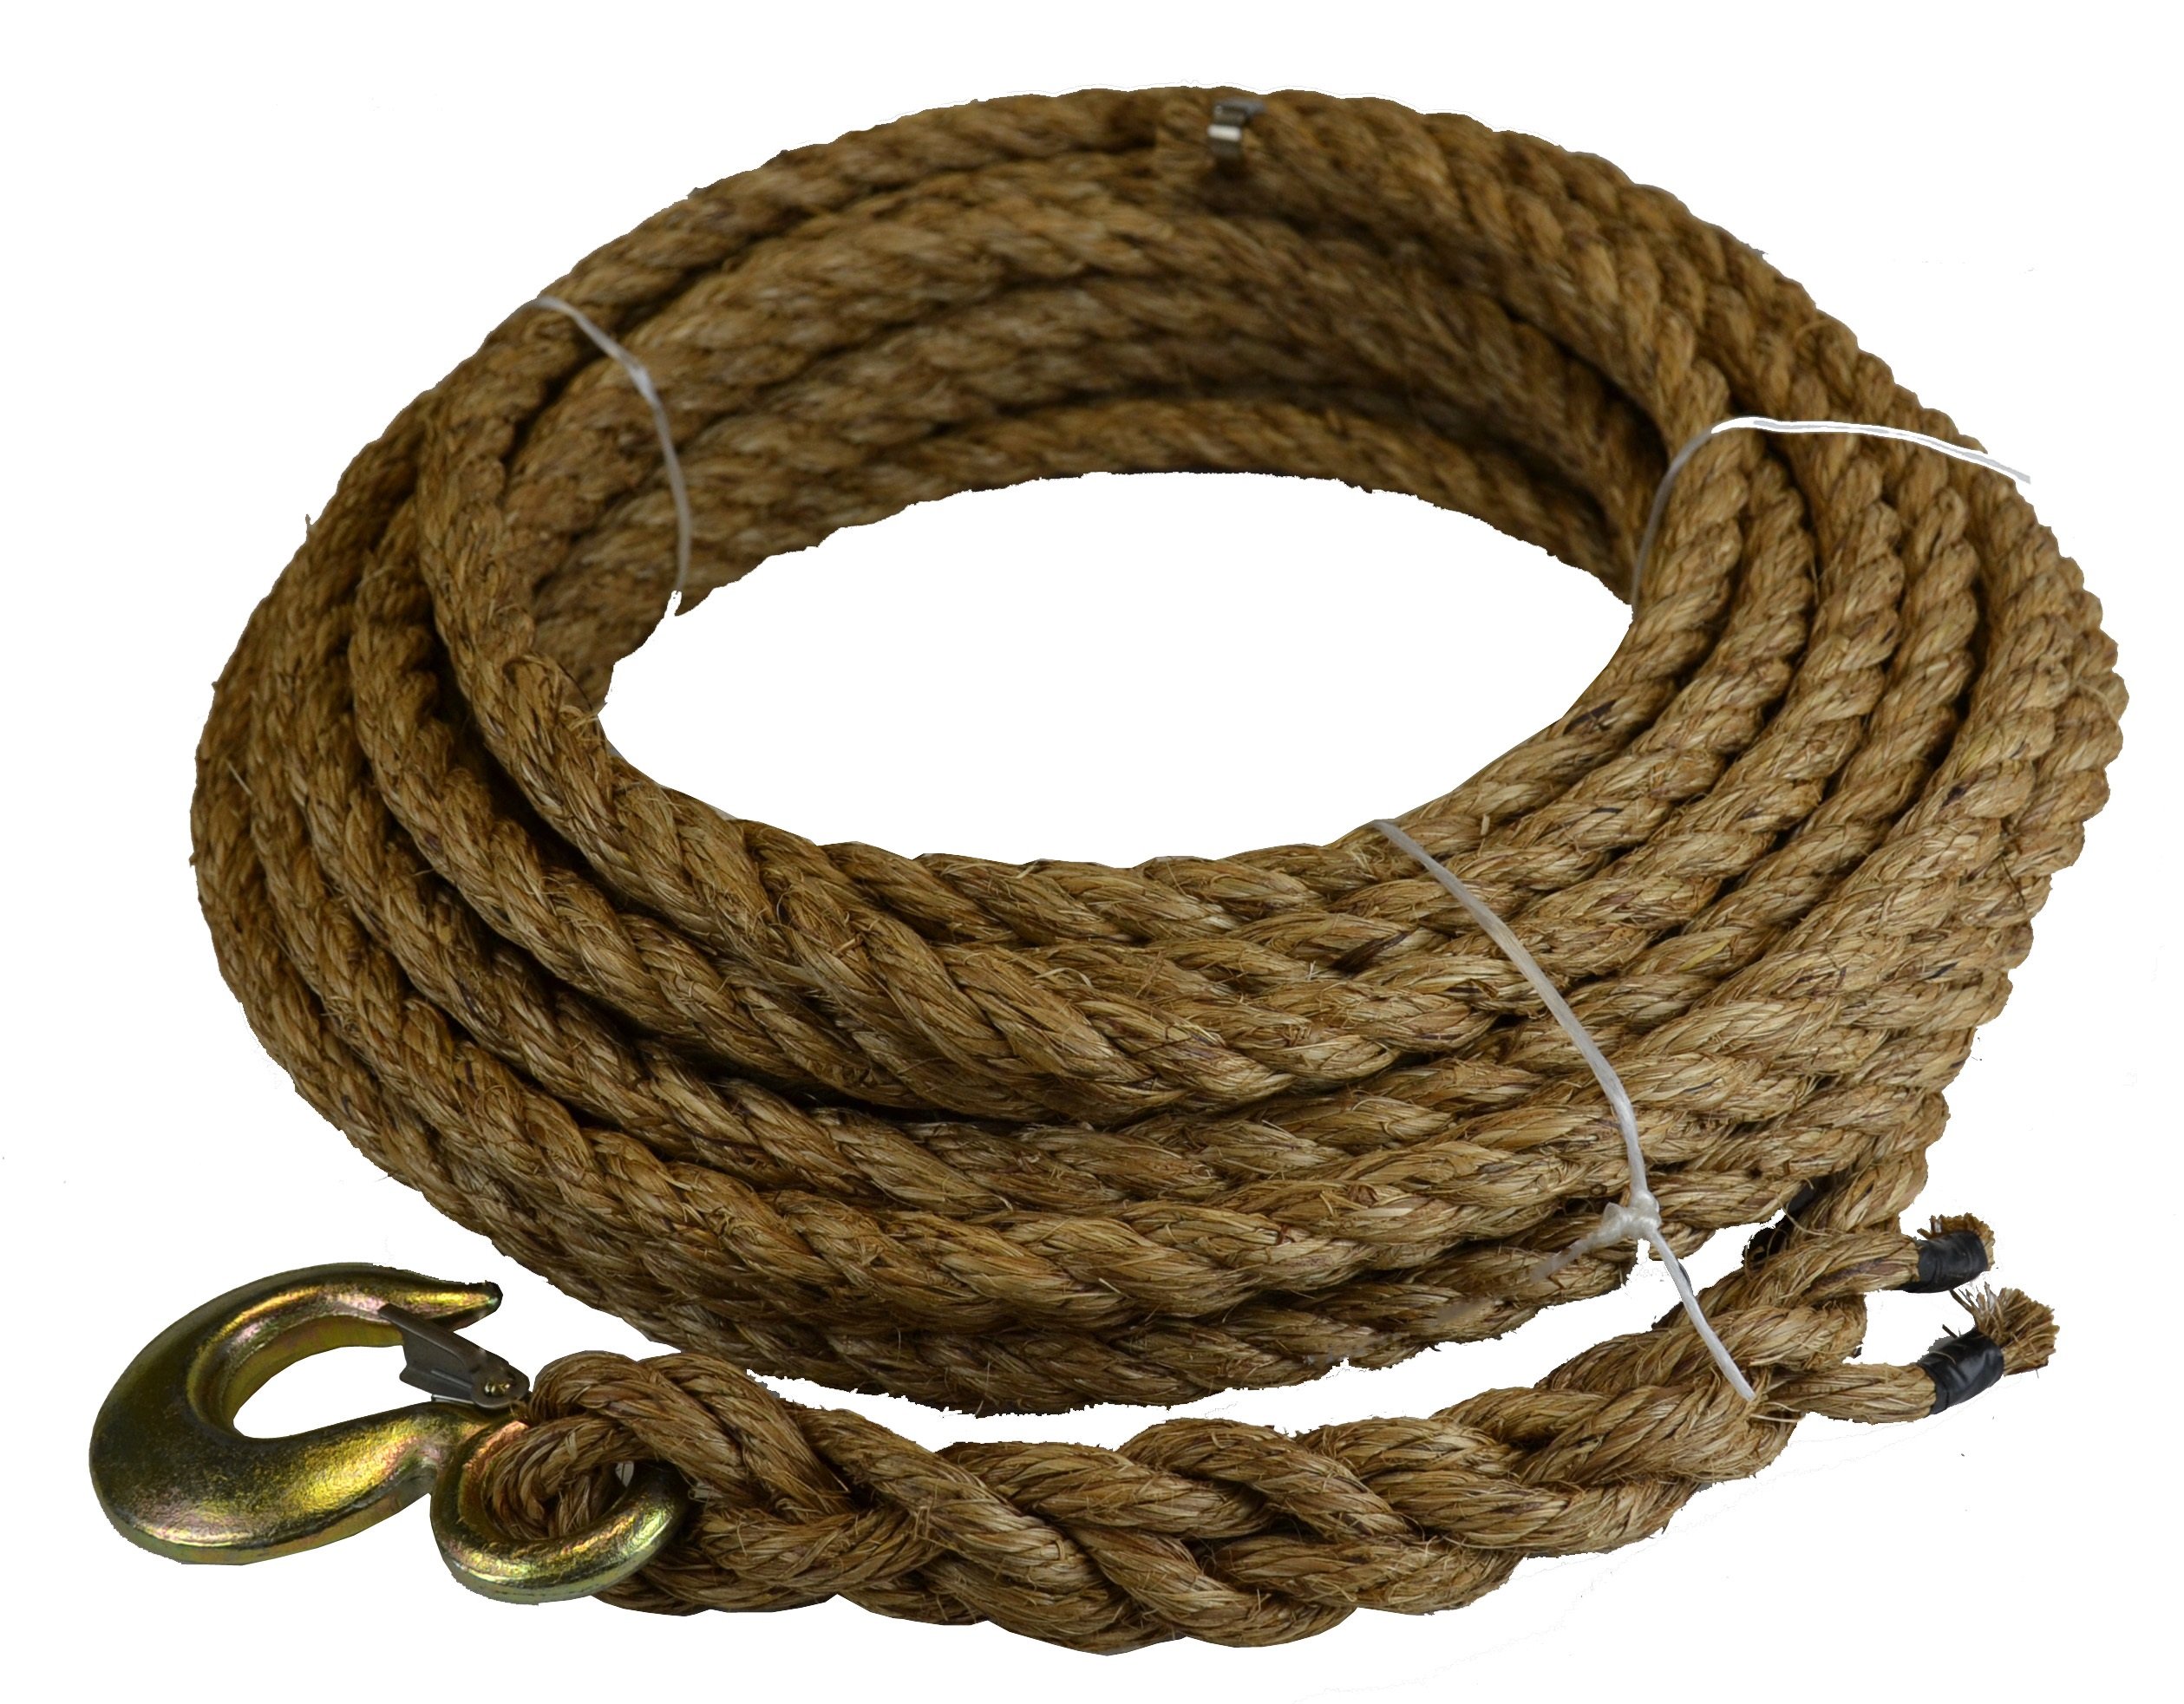  Rope With Hook